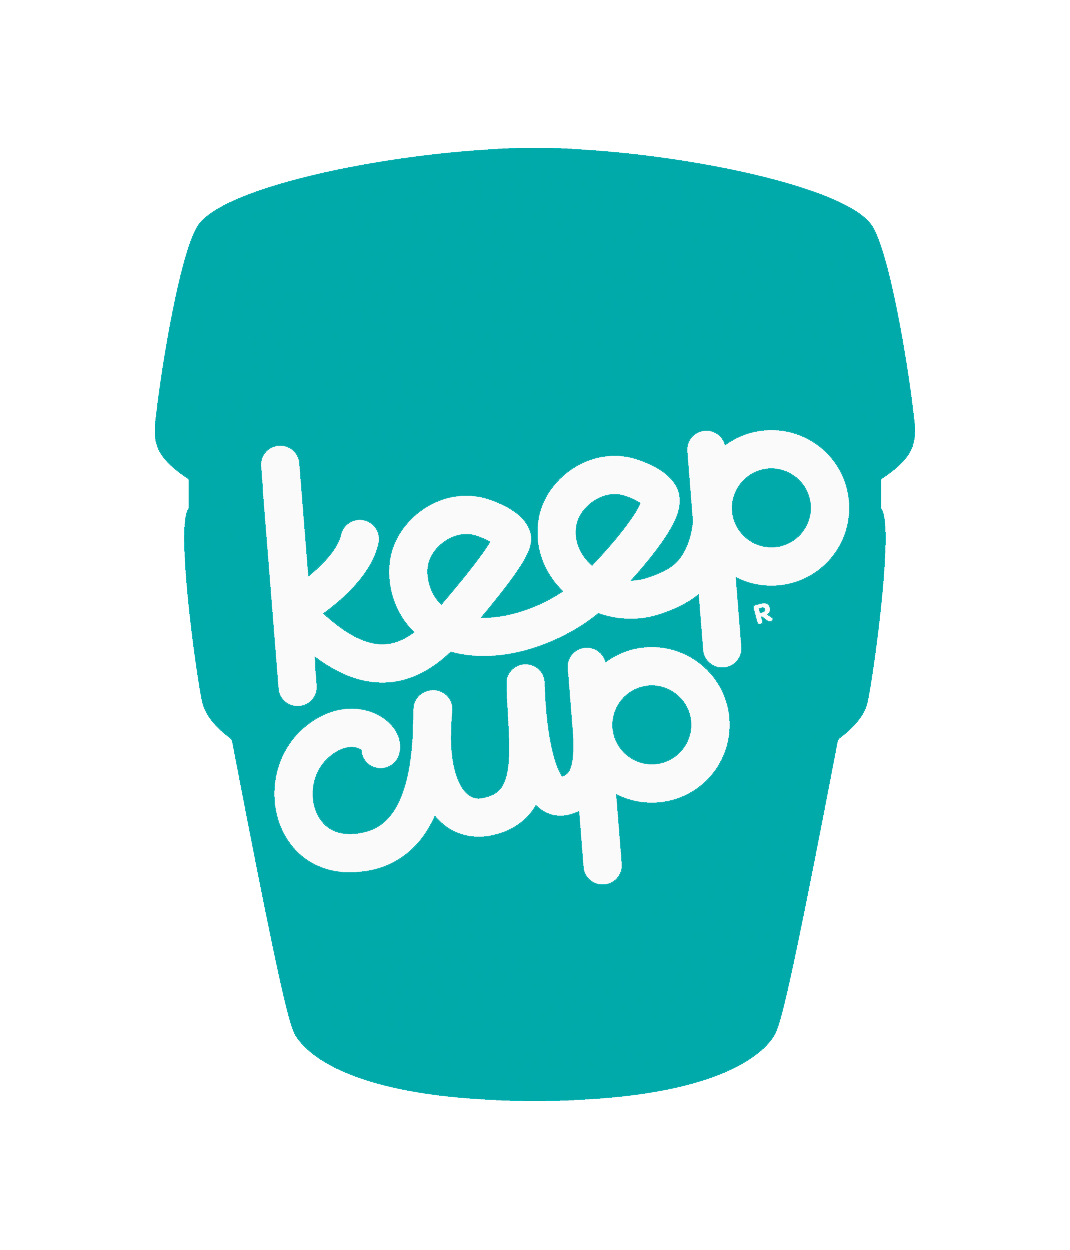 Keep Cup Coupons & Promo Codes